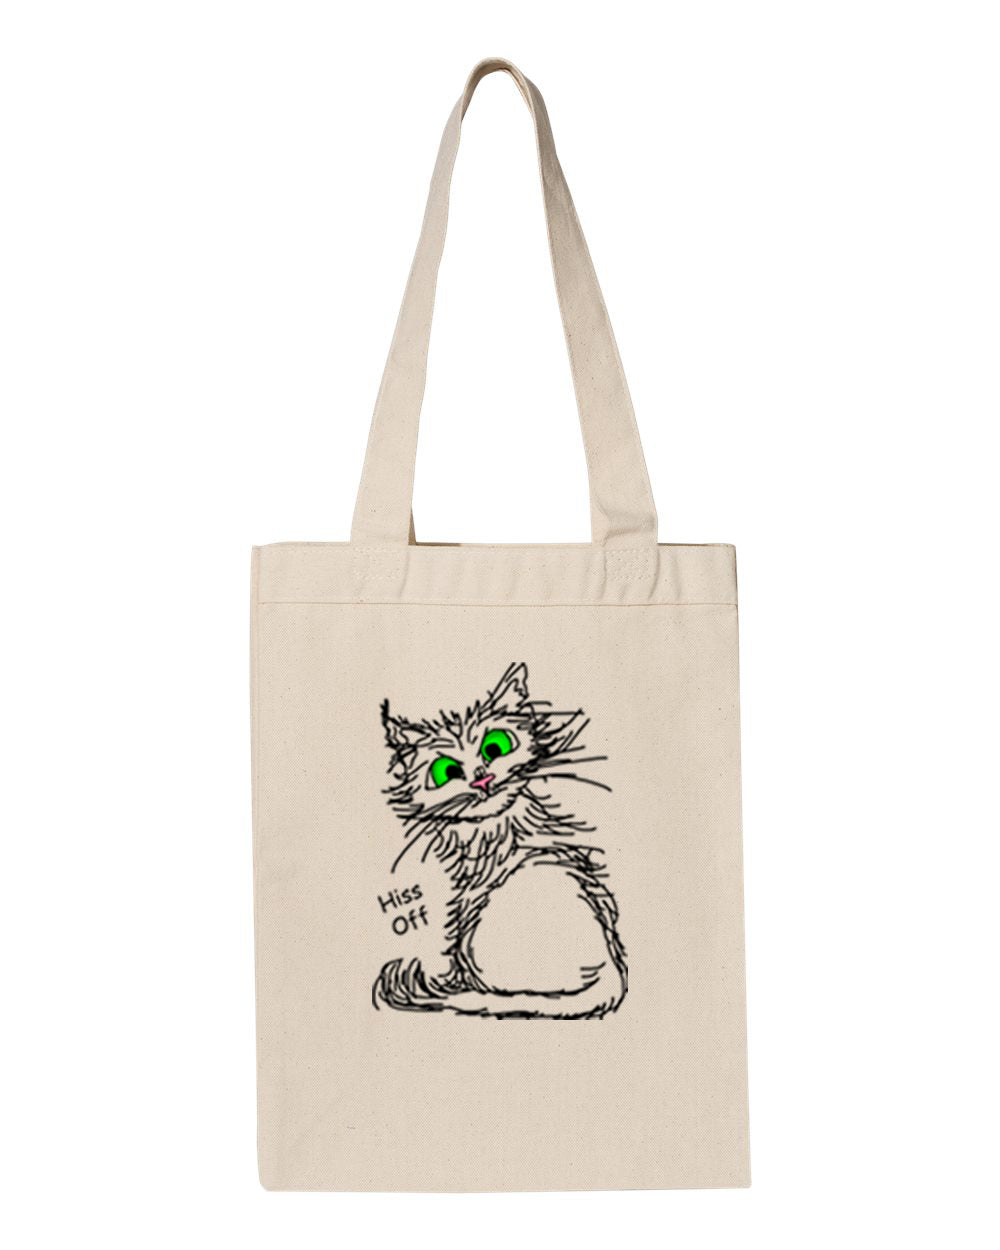 Black Hiss Off Cat on Gusset Tote